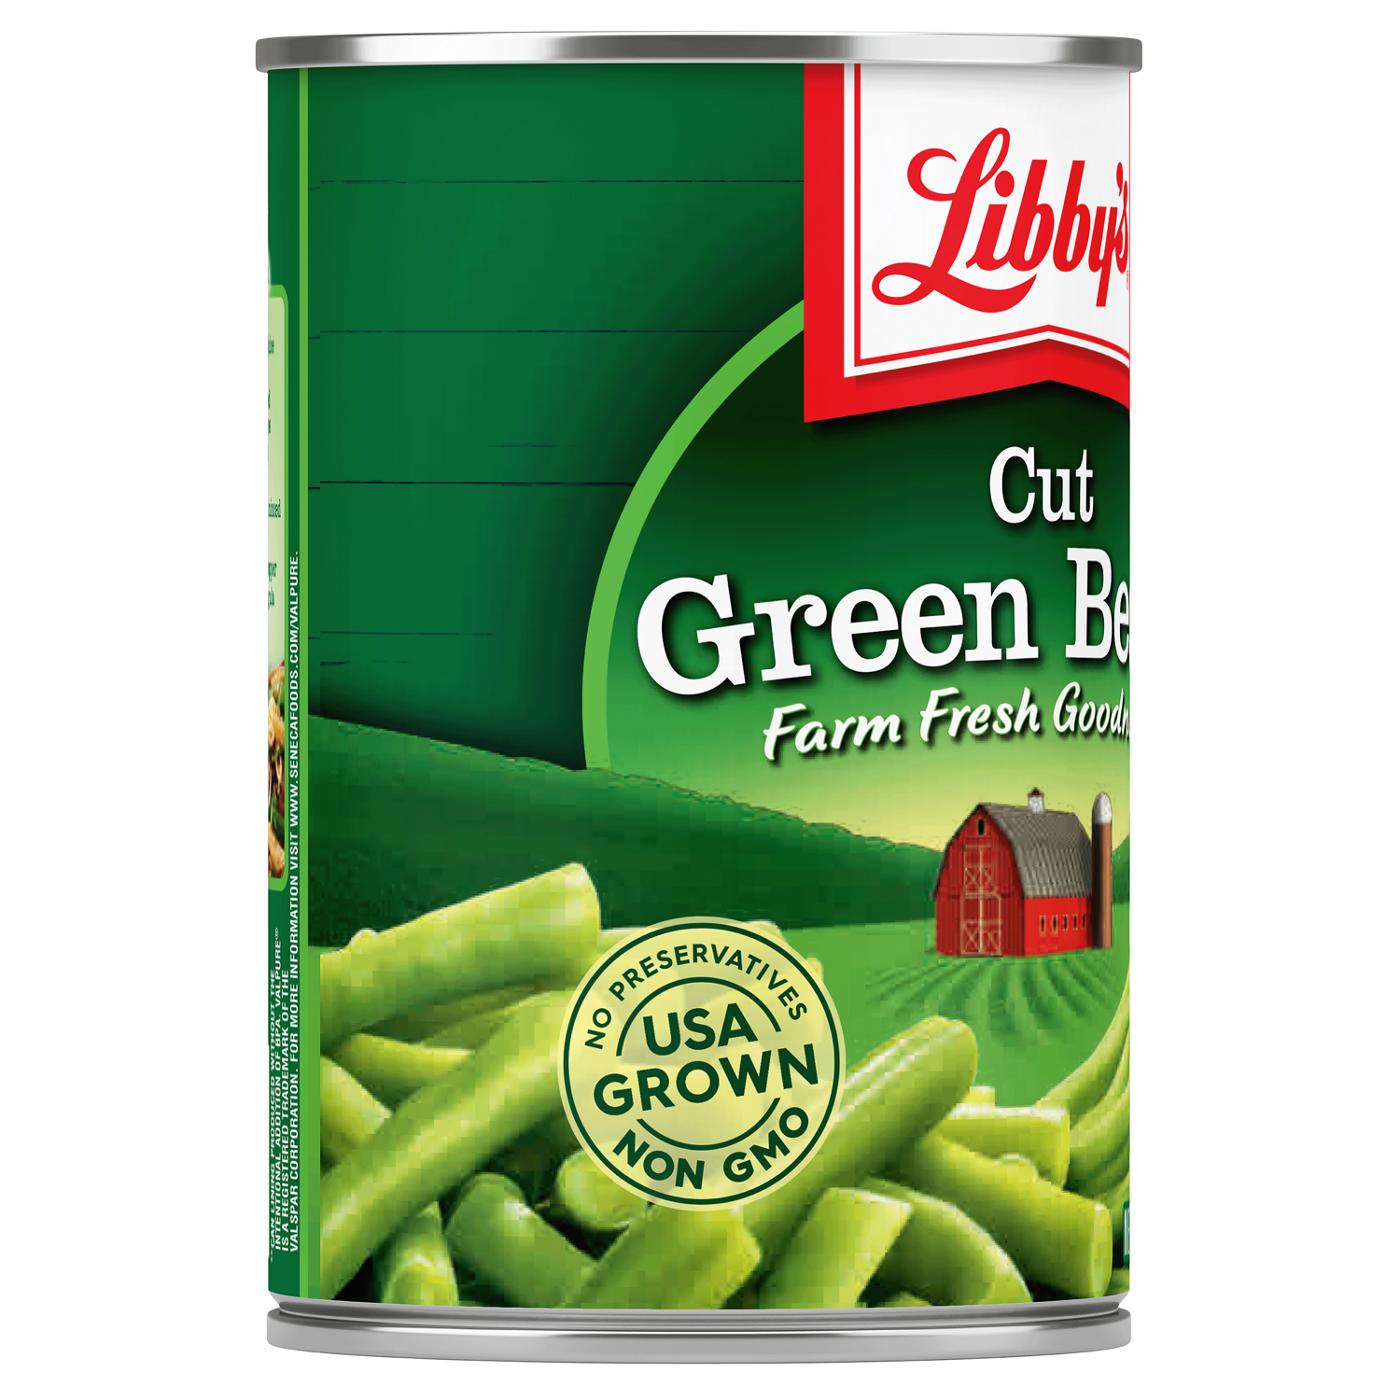 Libby's Cut Green Beans; image 5 of 5